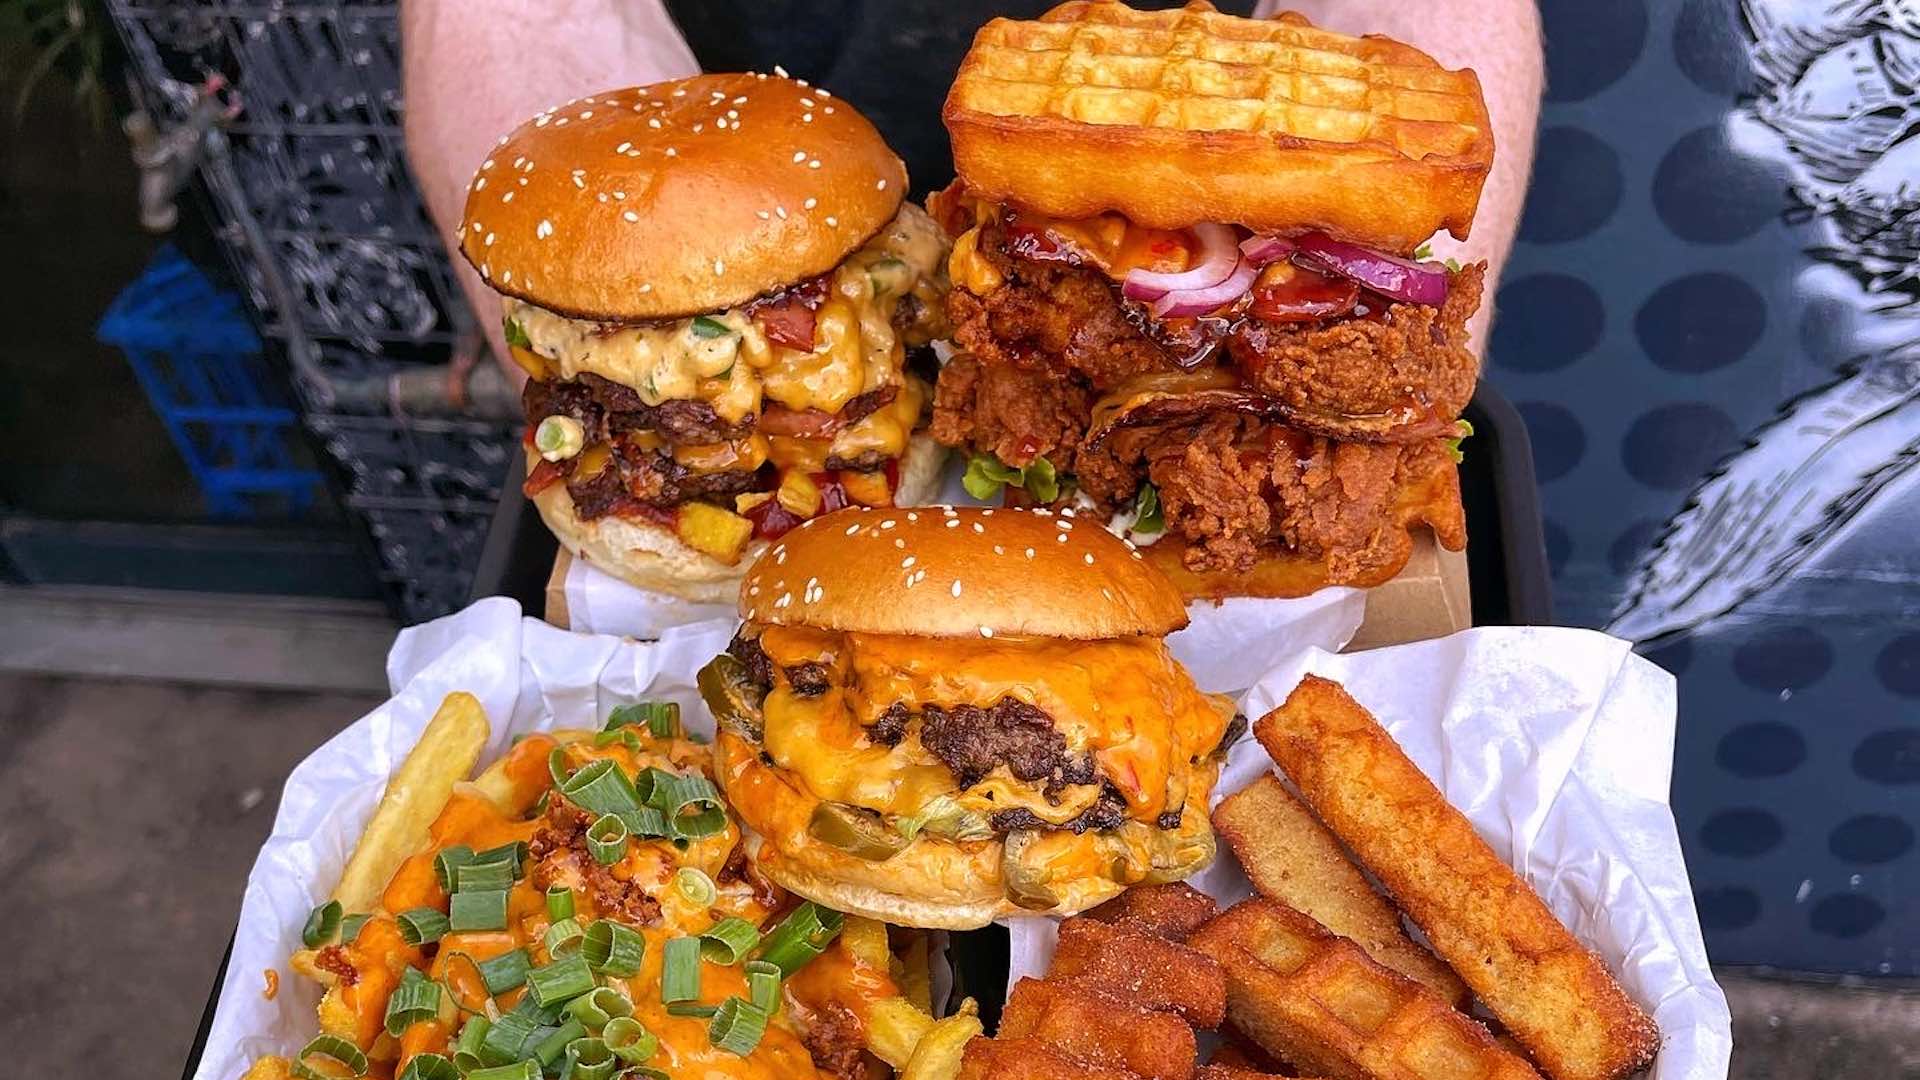 You Can Get a Massive Burger for Only $10 at These Four Venues Across Brisbane